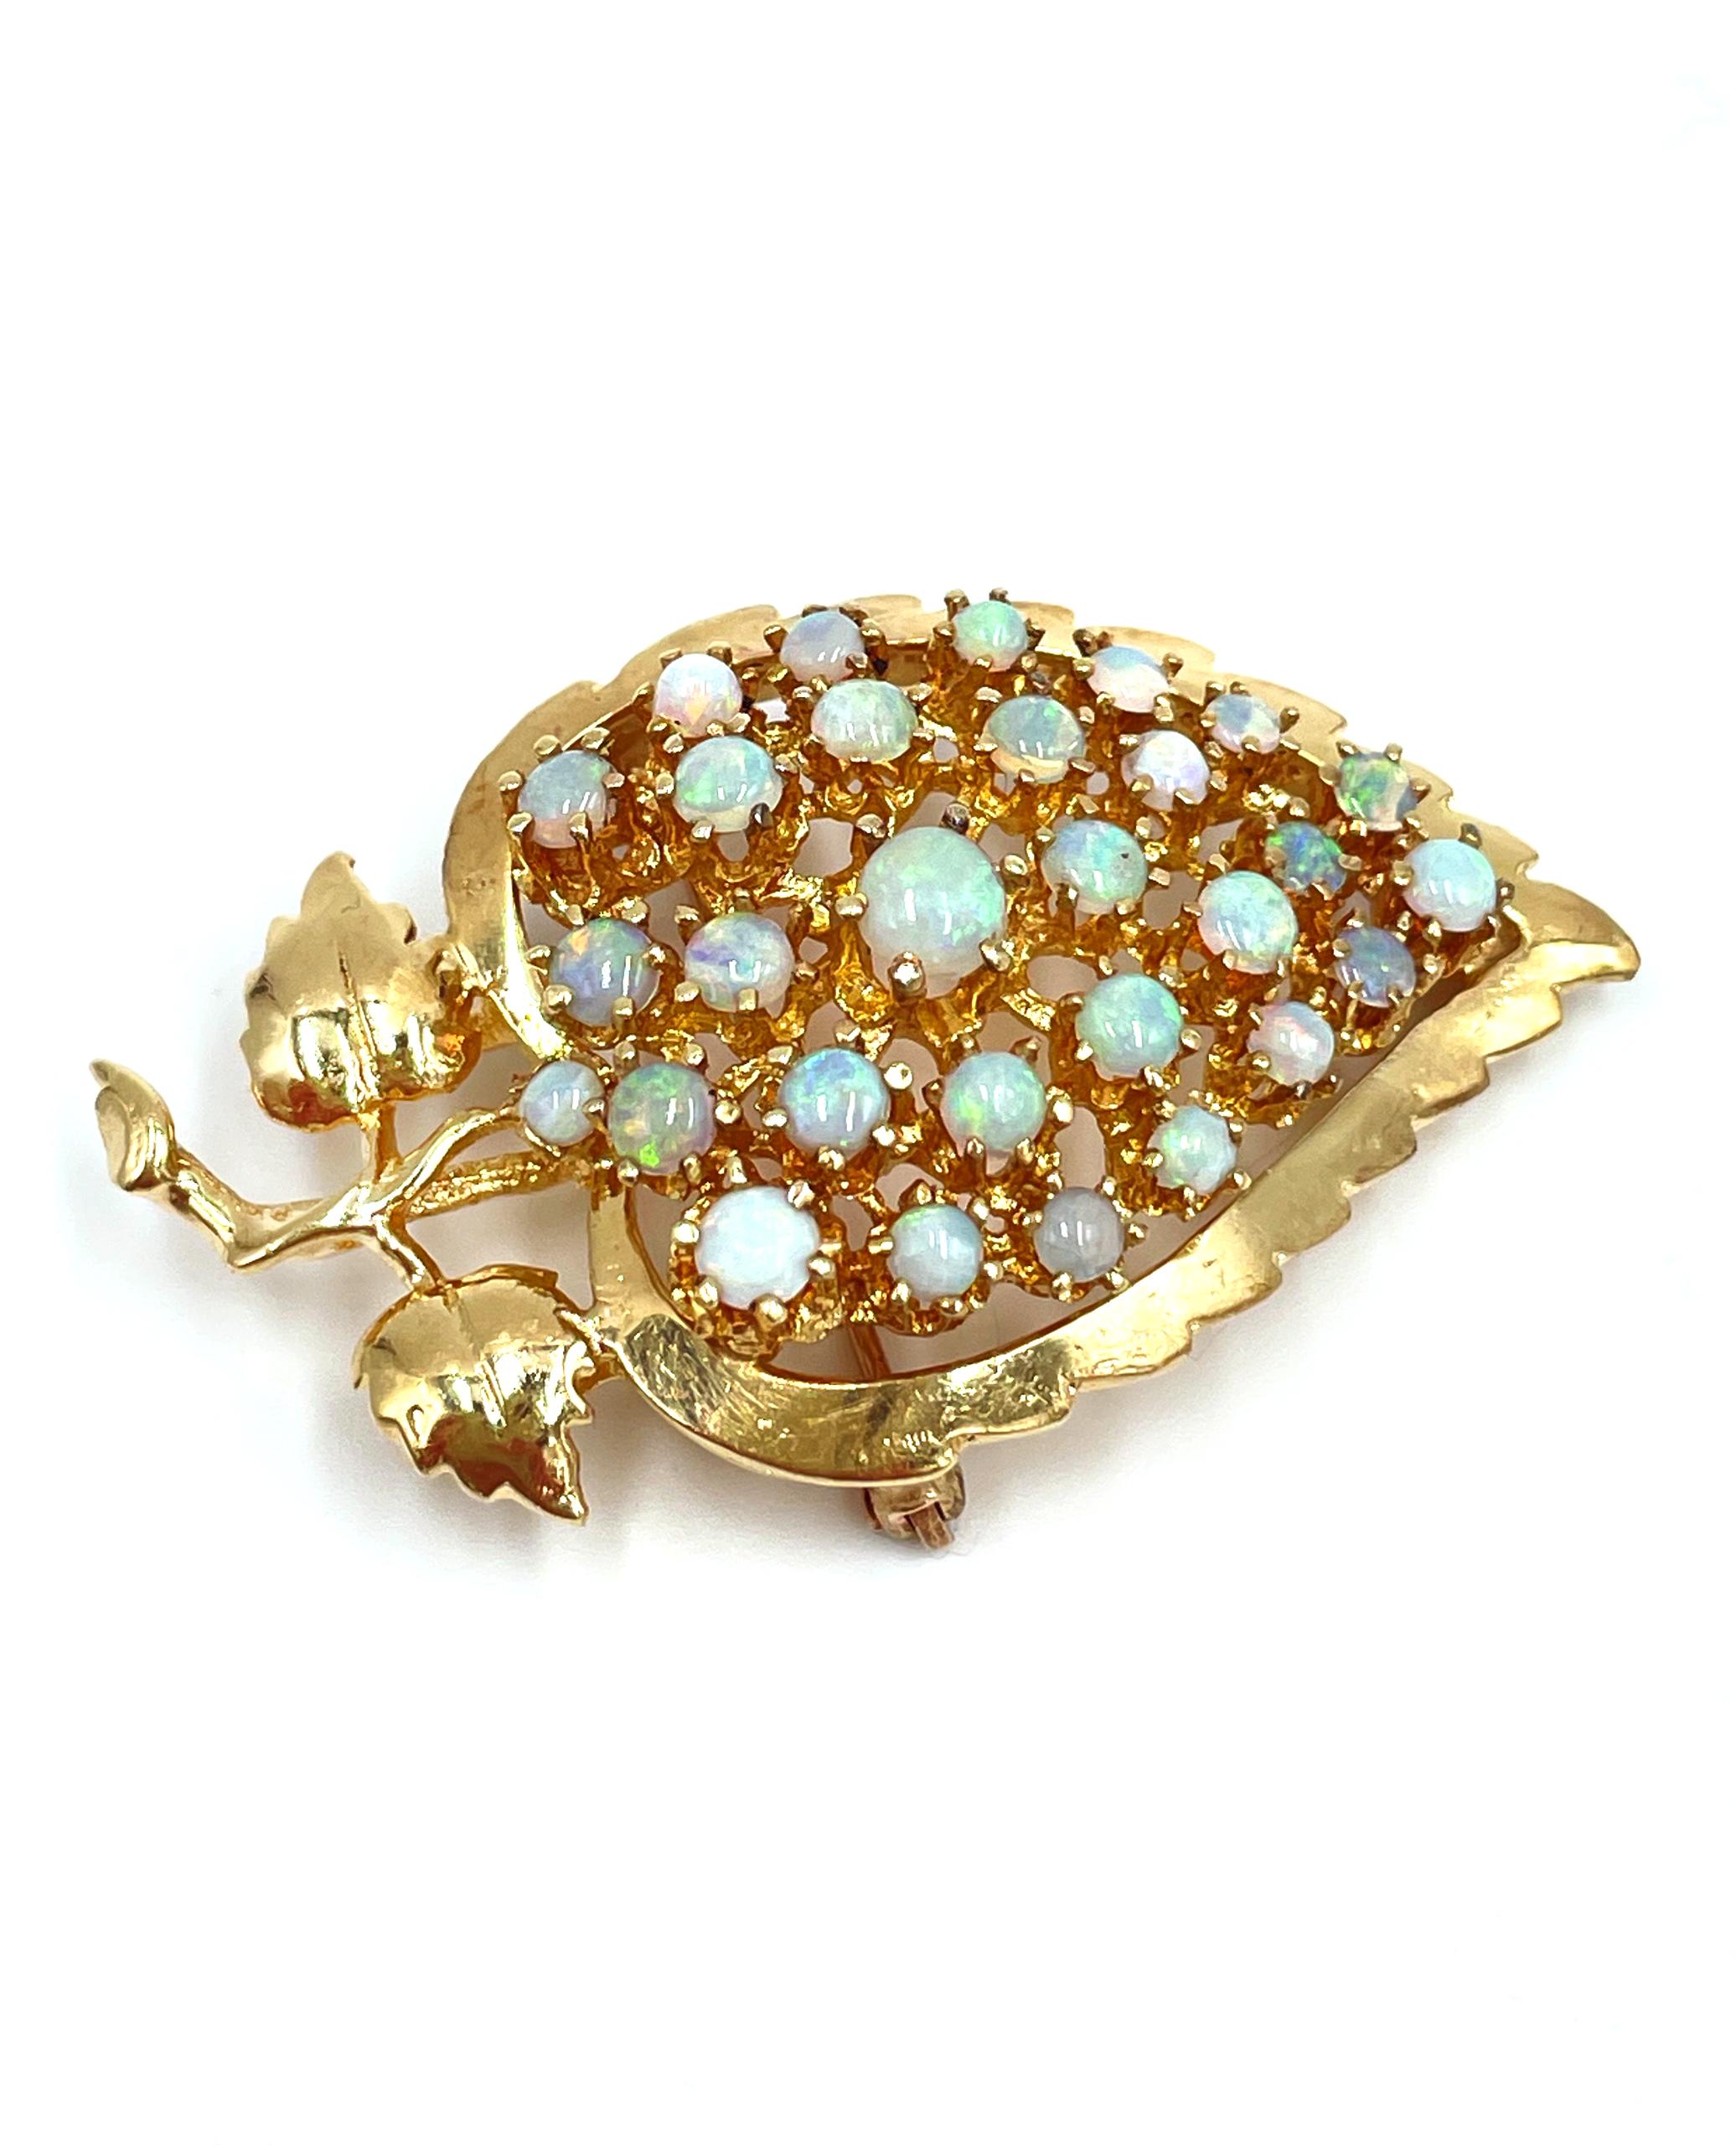 Cabochon Preowned 14K Yellow Gold Brooch Pin / Pendant with Opals Circa 1960s